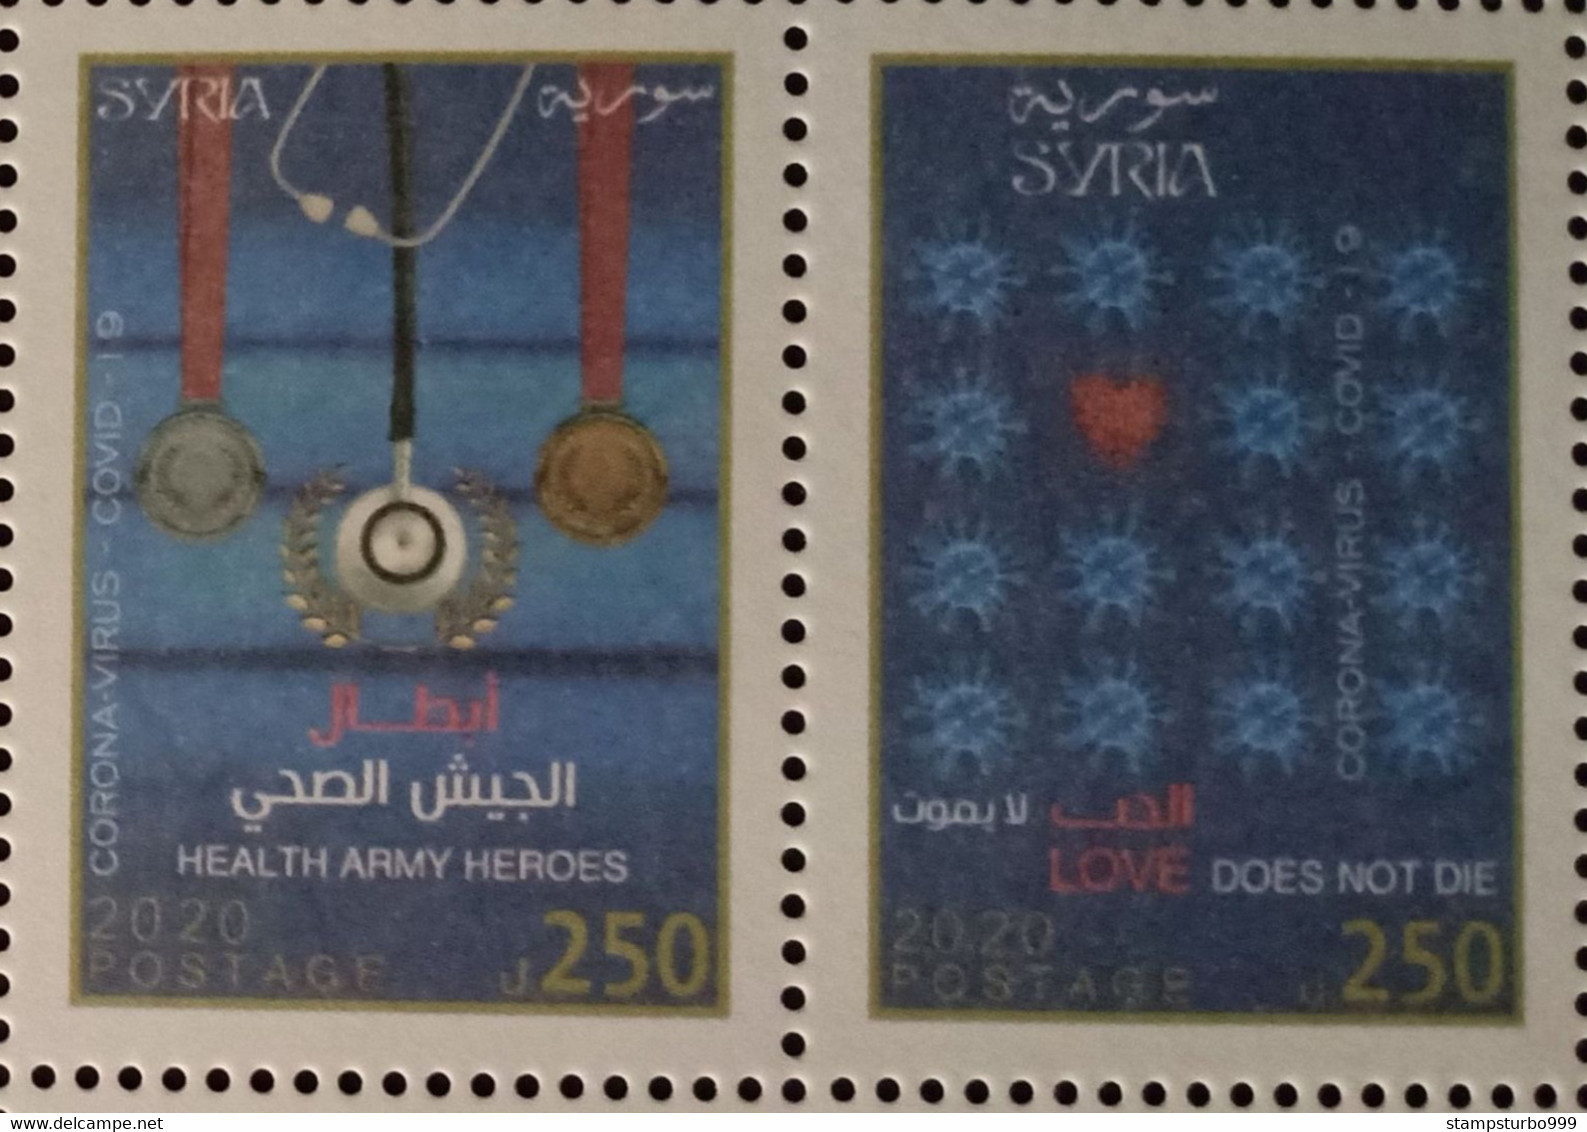 Syrien, Syrie, Syria 2020 Corona Virus (Covid-19)site As Photo, Very Rare Only 5000 Set Issued MNH ** - Unused Stamps